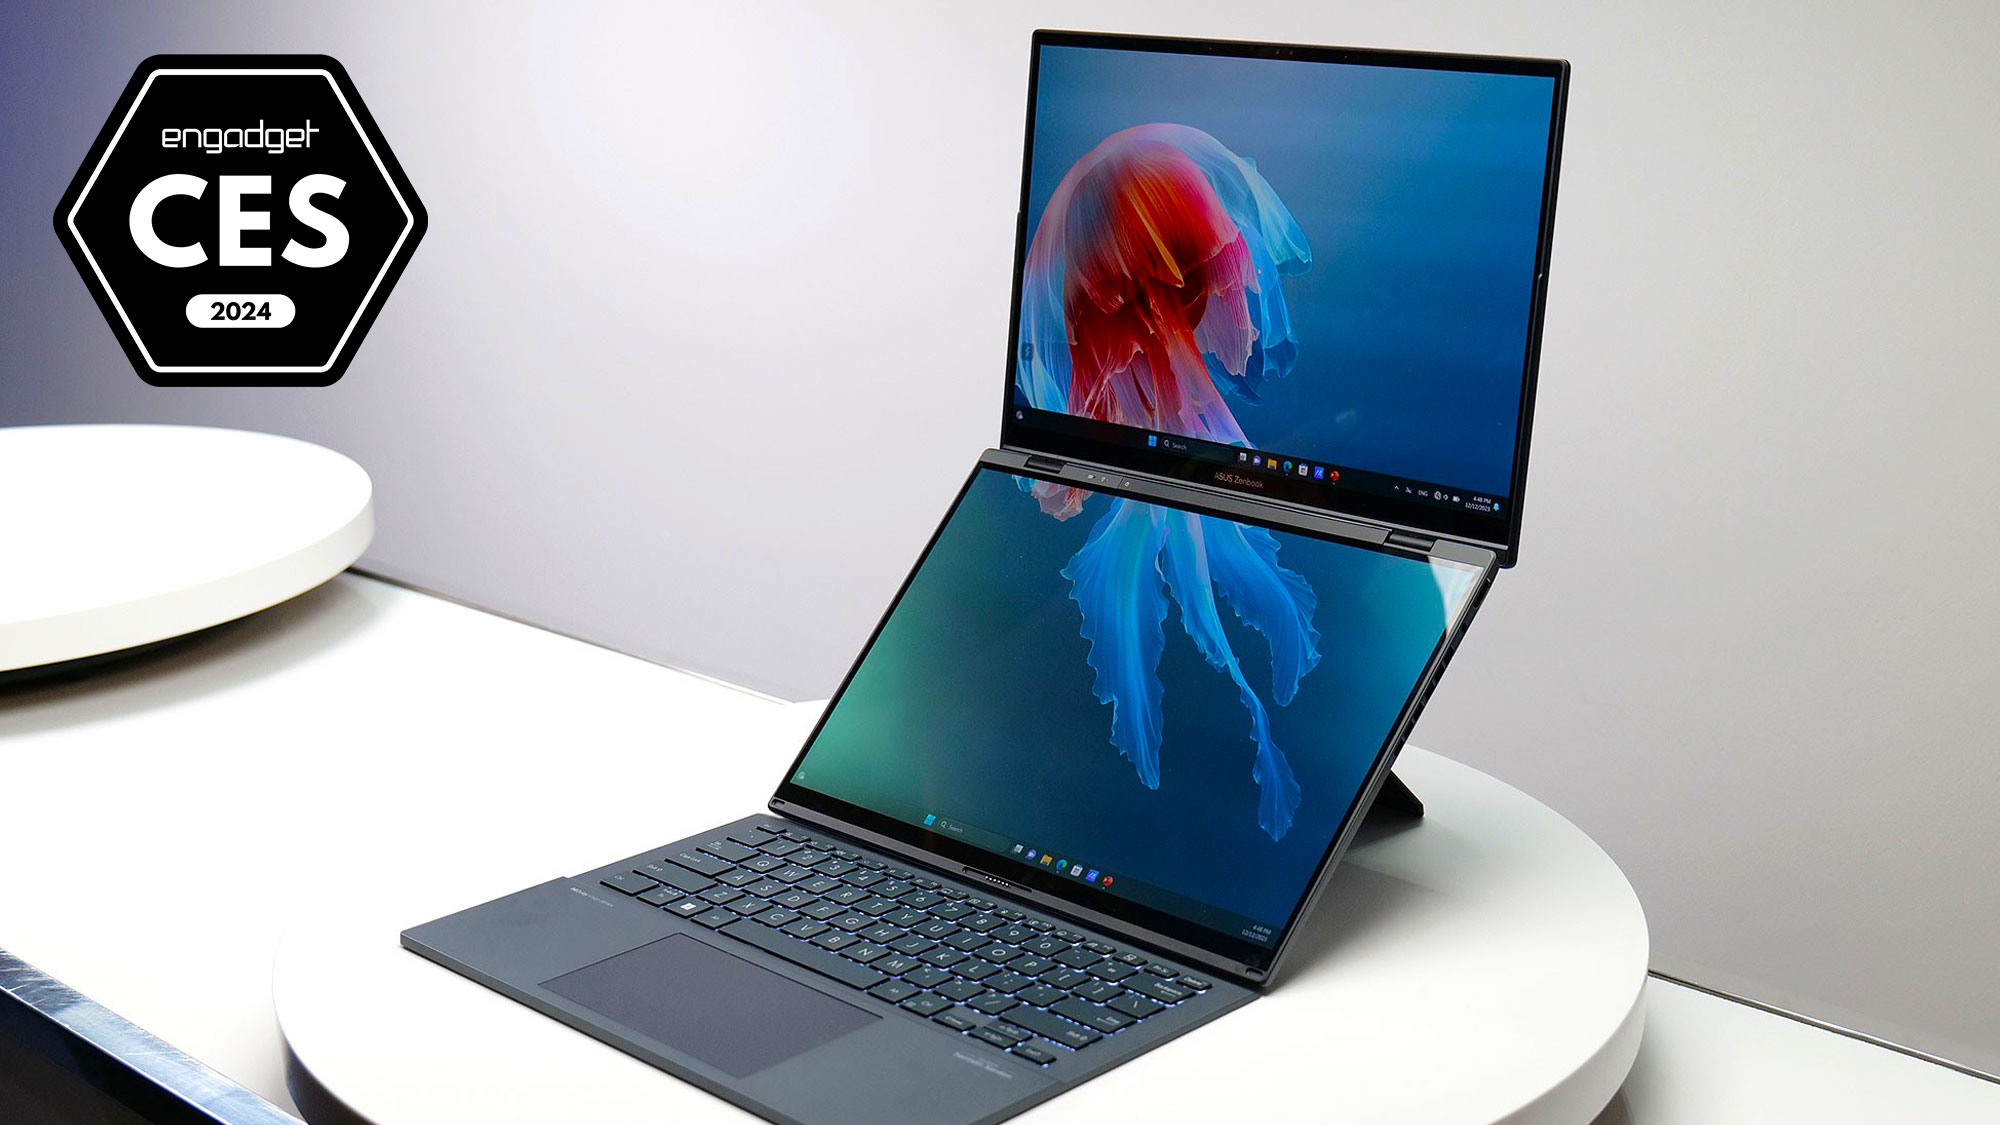 An image with a badge for Engadget Best of CES 2024 showing the product: ASUS ZenBook Duo laptop with a dual monitor on top of the normal laptop version on a white display table at the event.